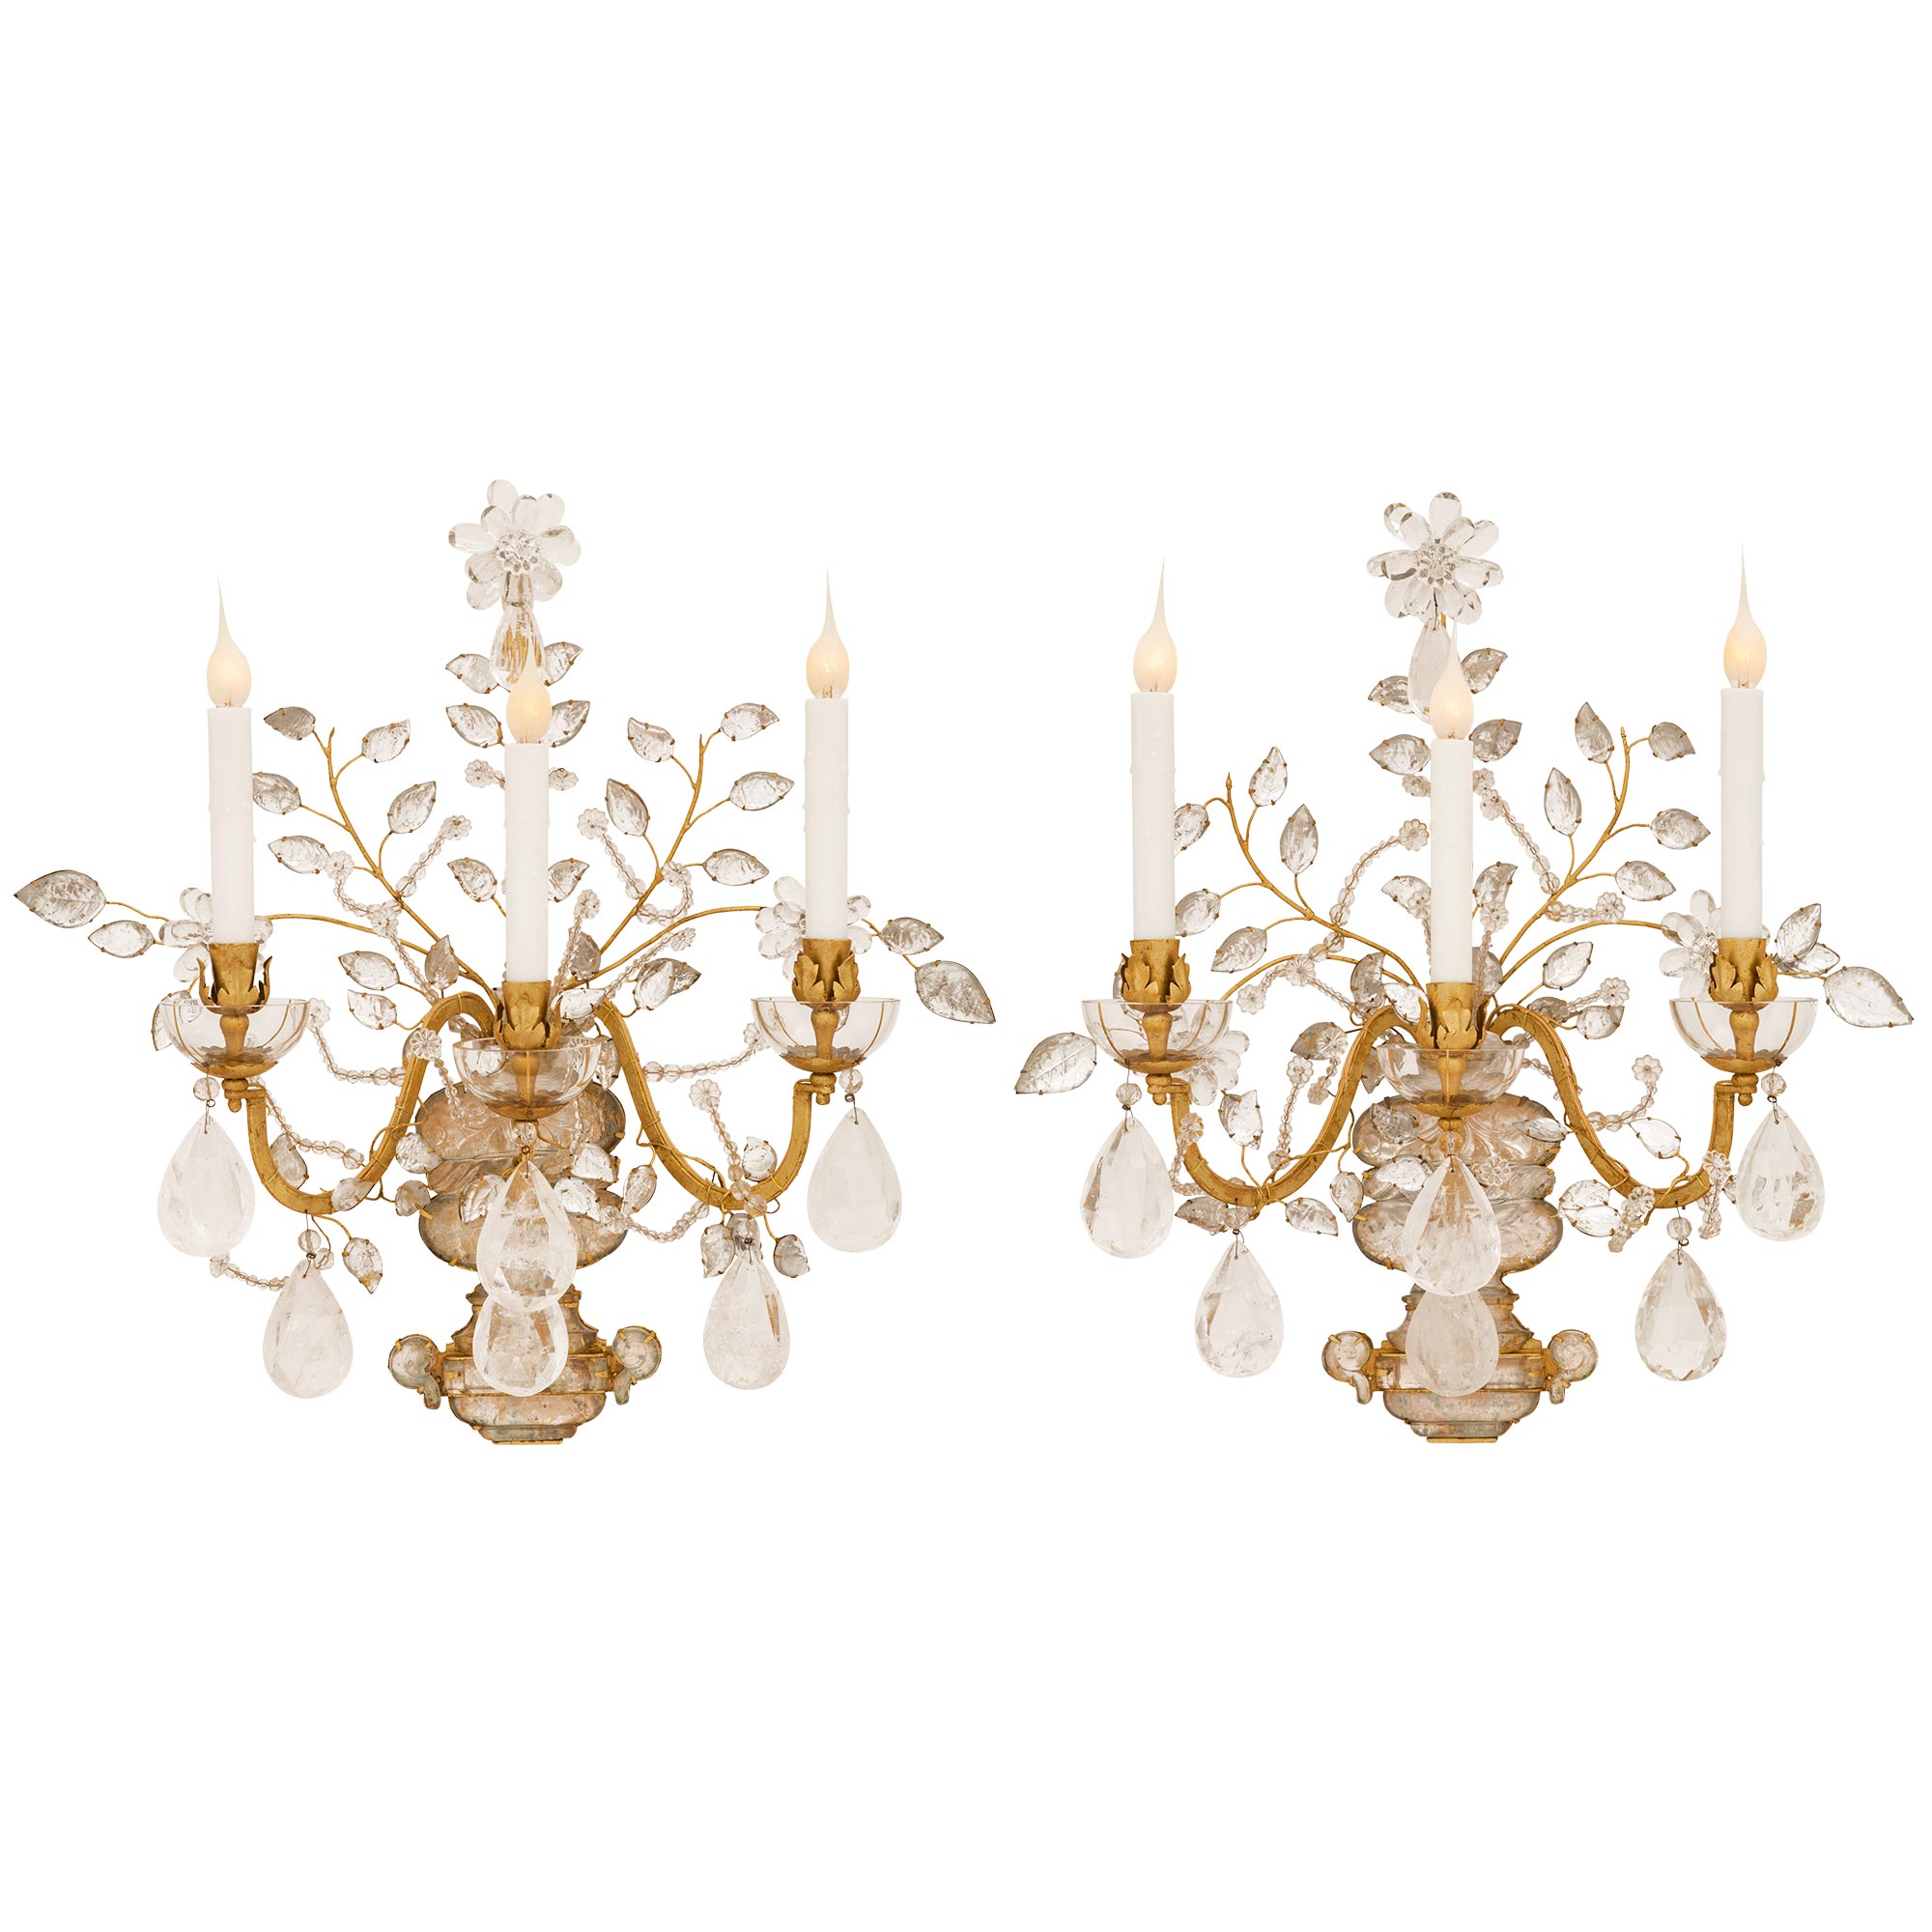 True Pair Of French 20th c. Louis XVI St. Crystal & Rock Crystal Sconces For Sale